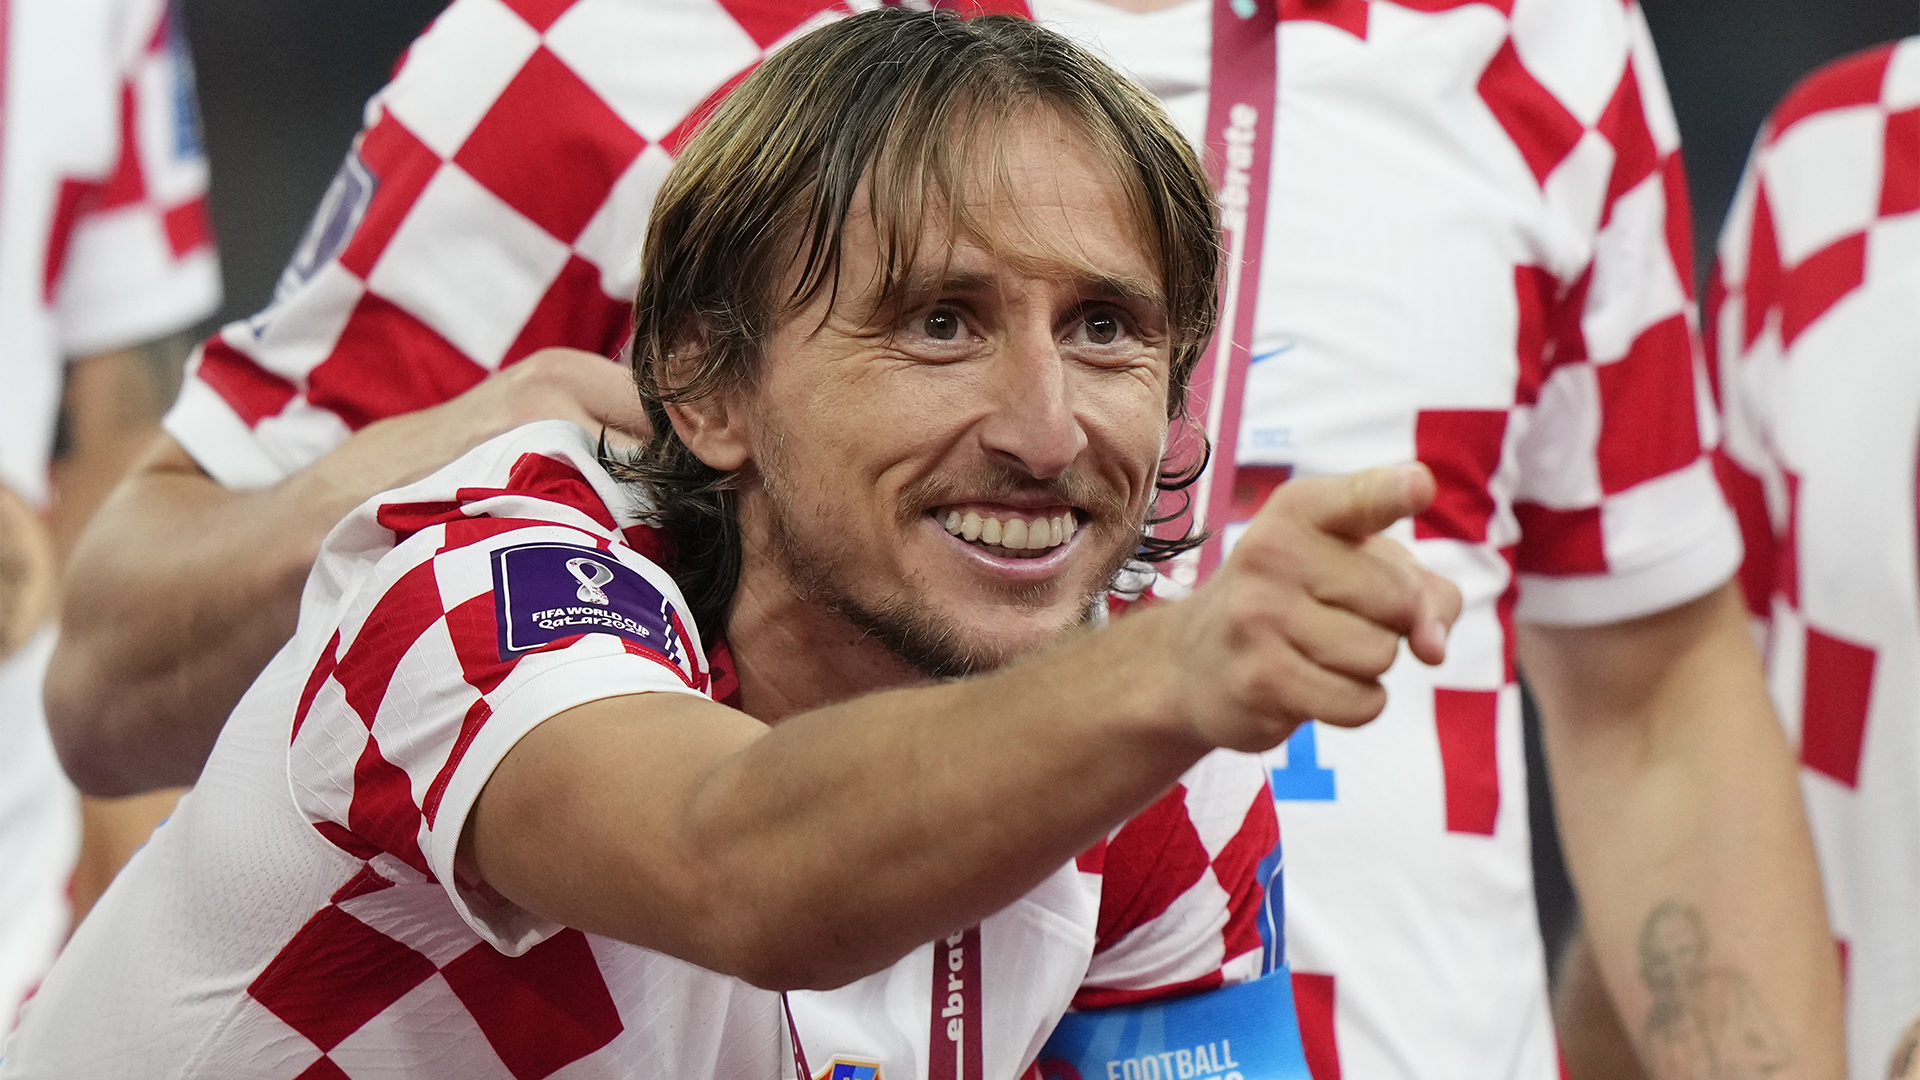 Luka Modric is a man who commands the utmost respect